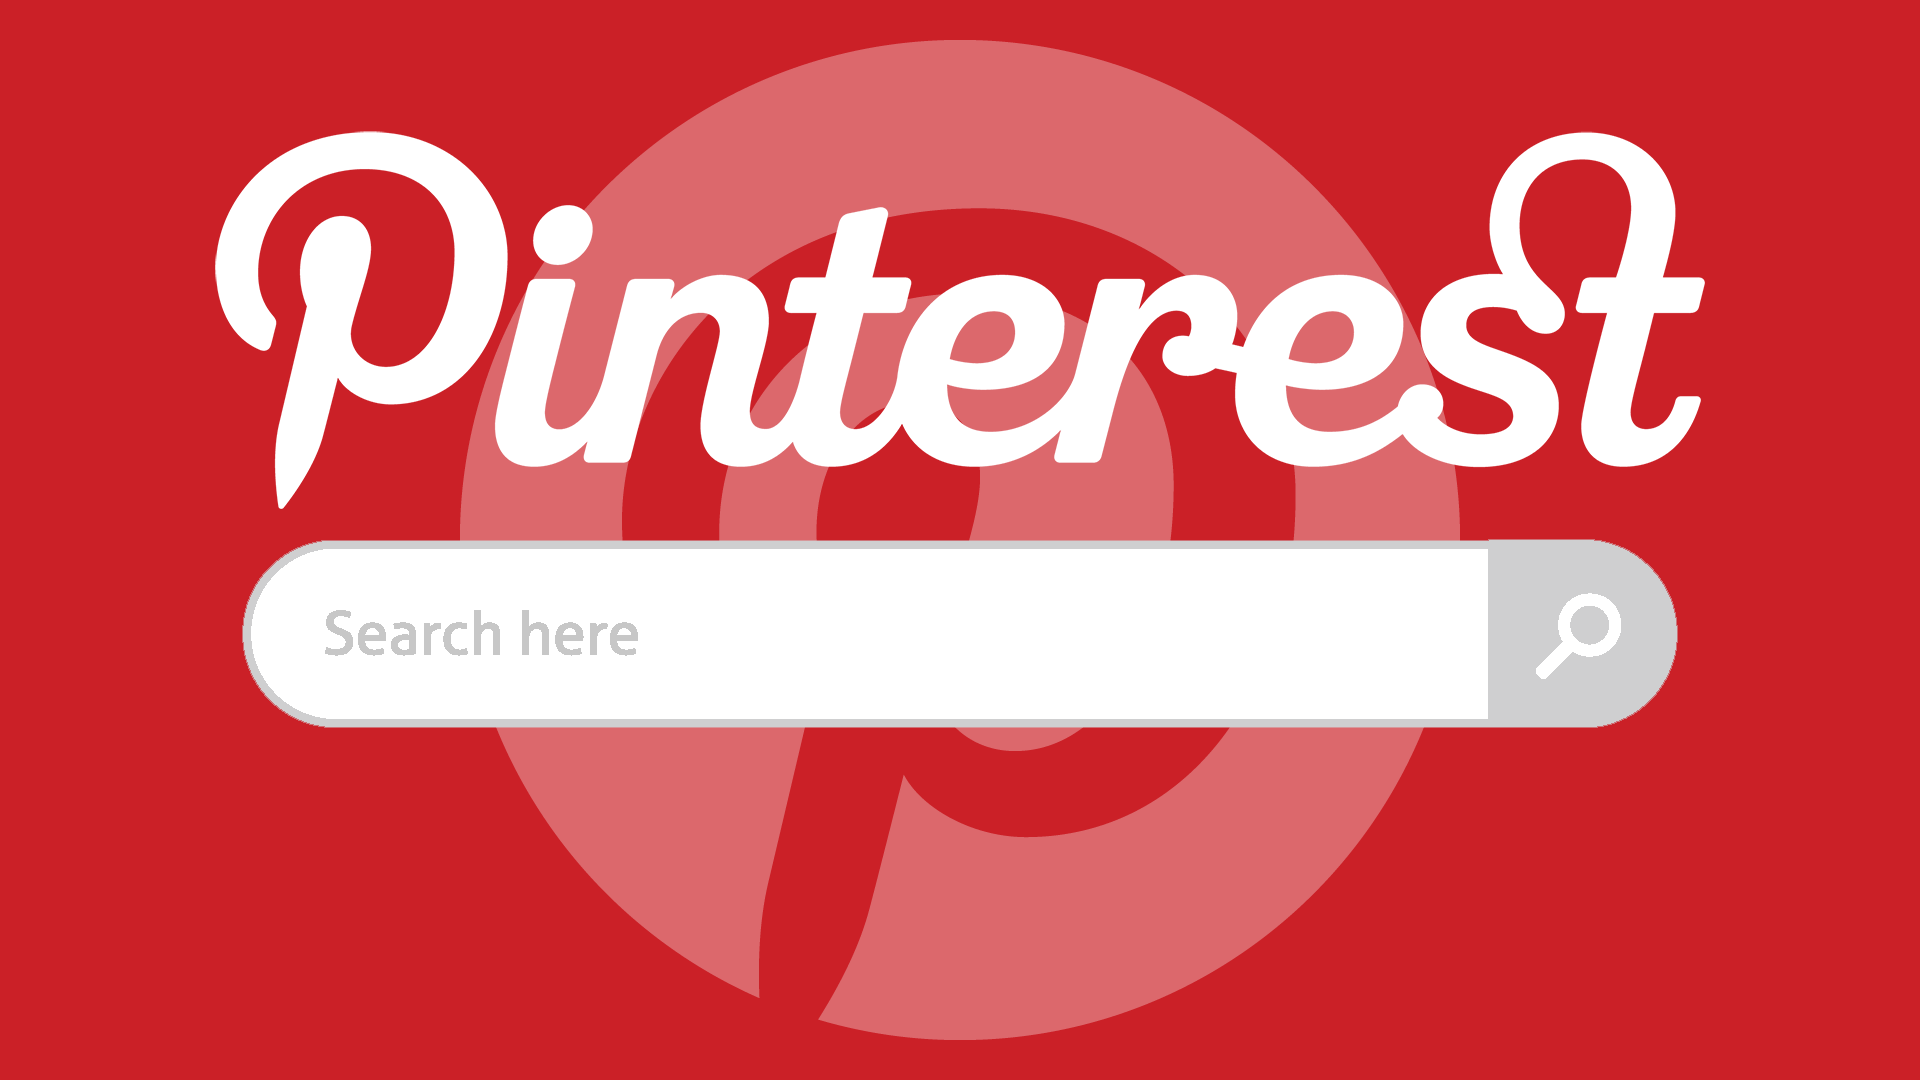 Pinterest App Logo - Pinterest's Lens app turns your phone's camera into a search bar